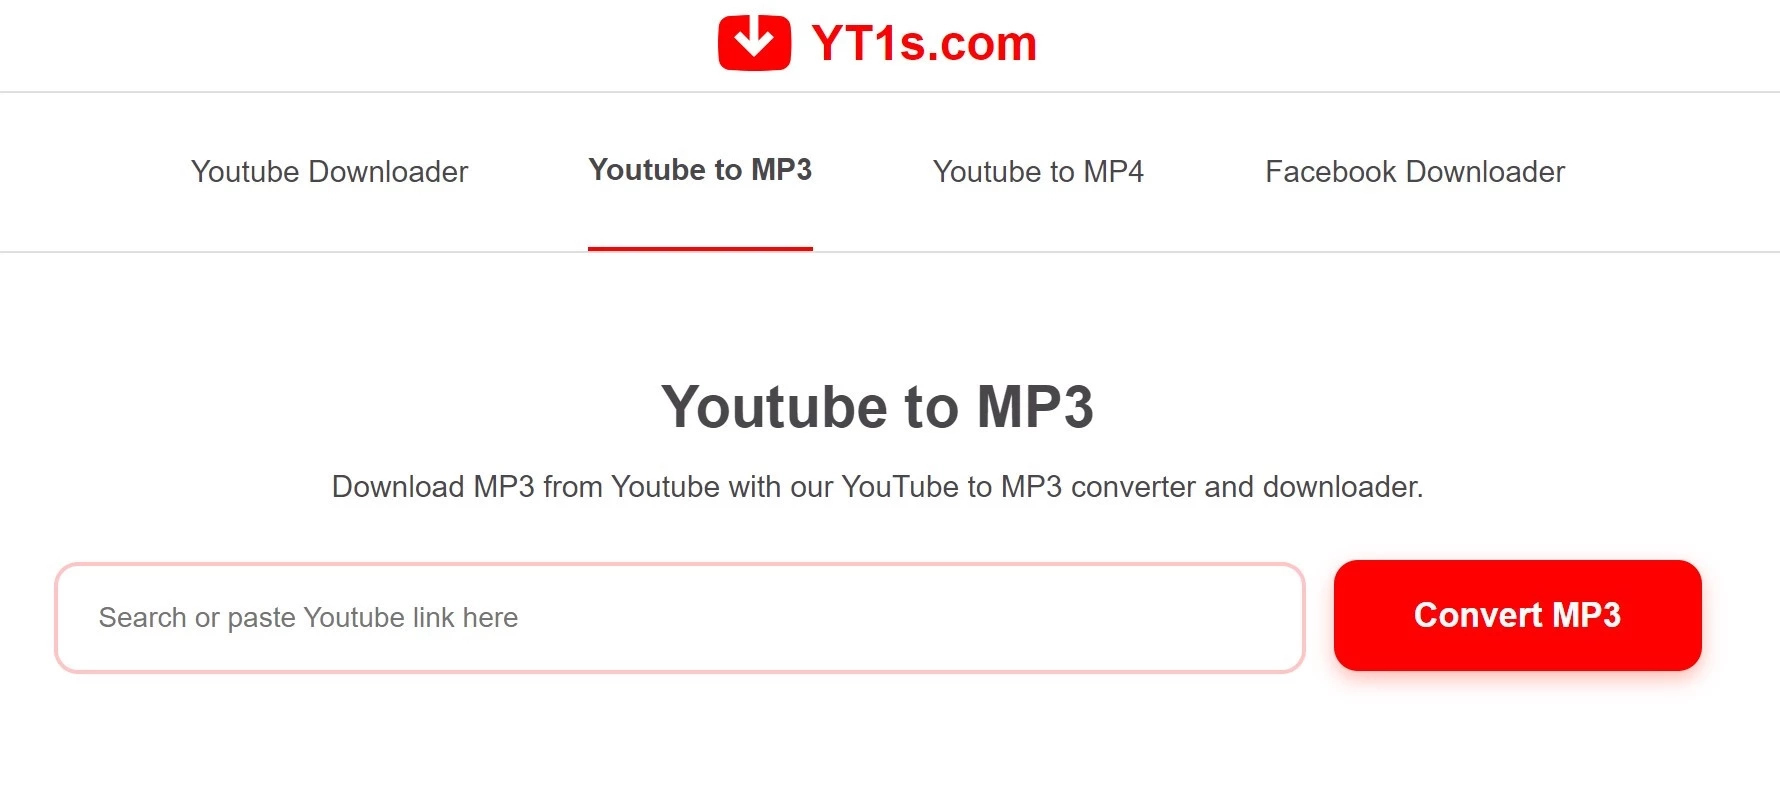 Youtube to MP3 converter YT1